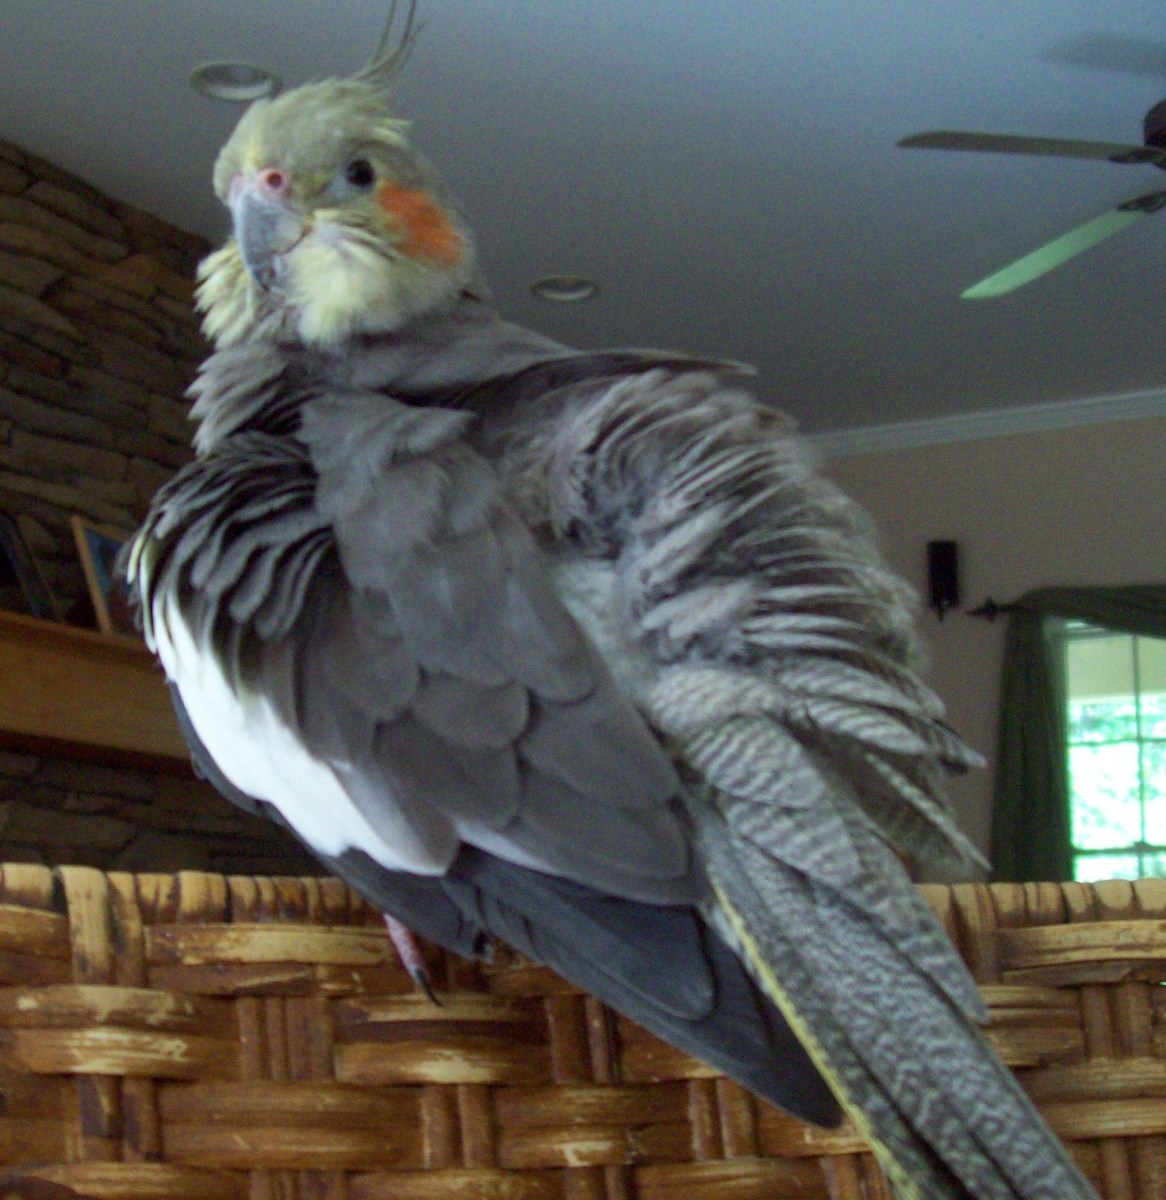 Rocky frequently fluffs up all his feathers.